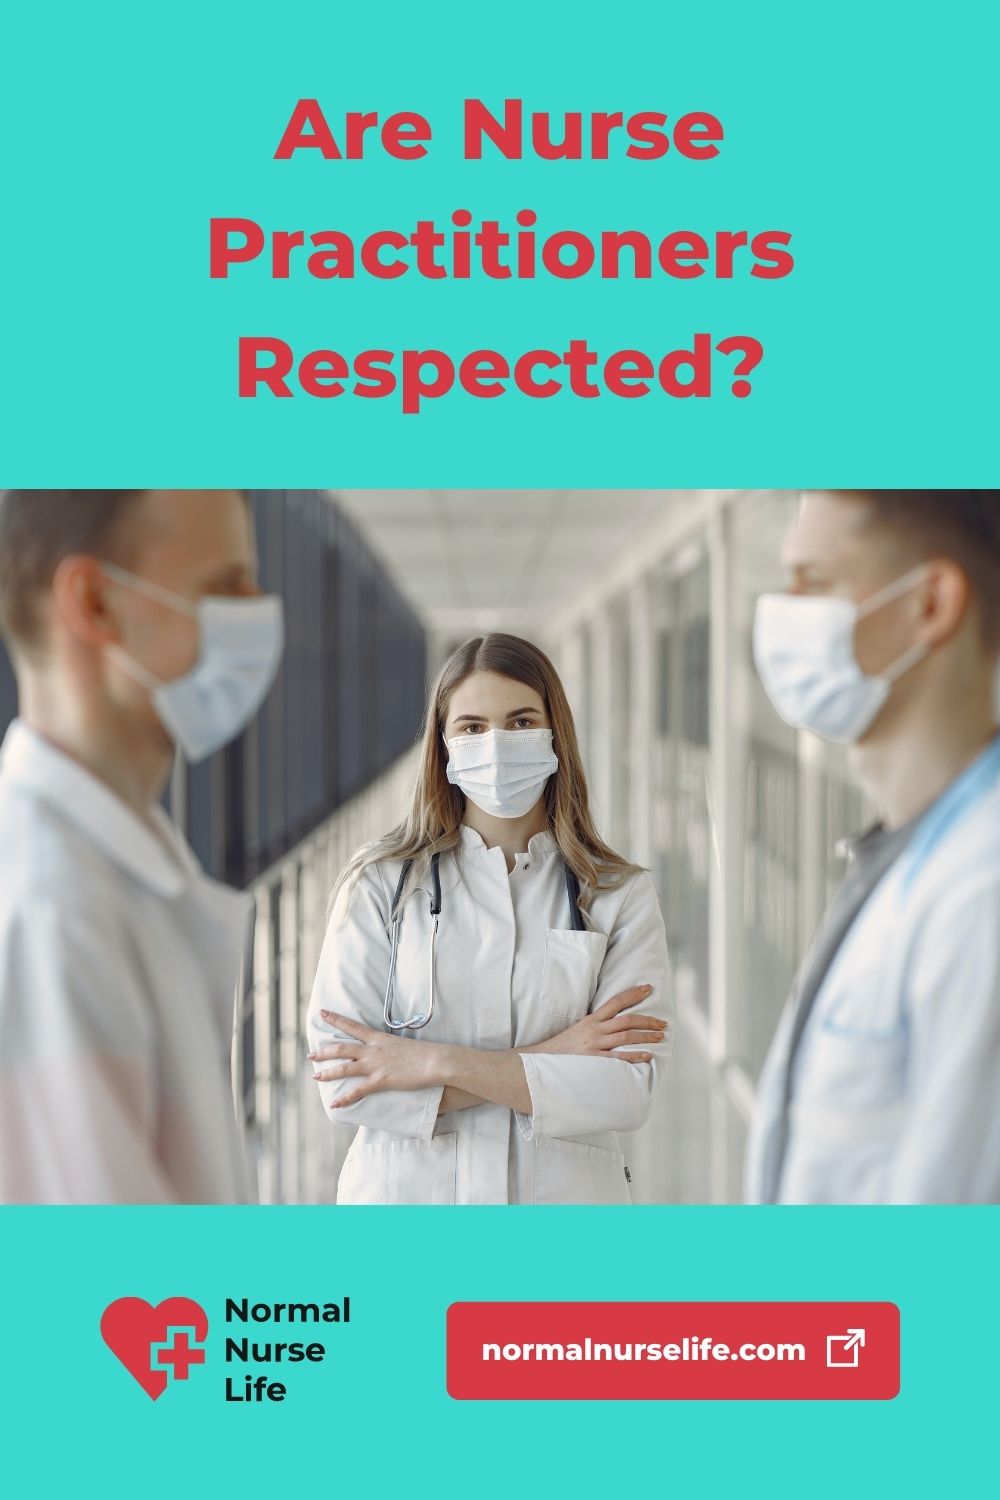 Are nurse practitioners respected or not